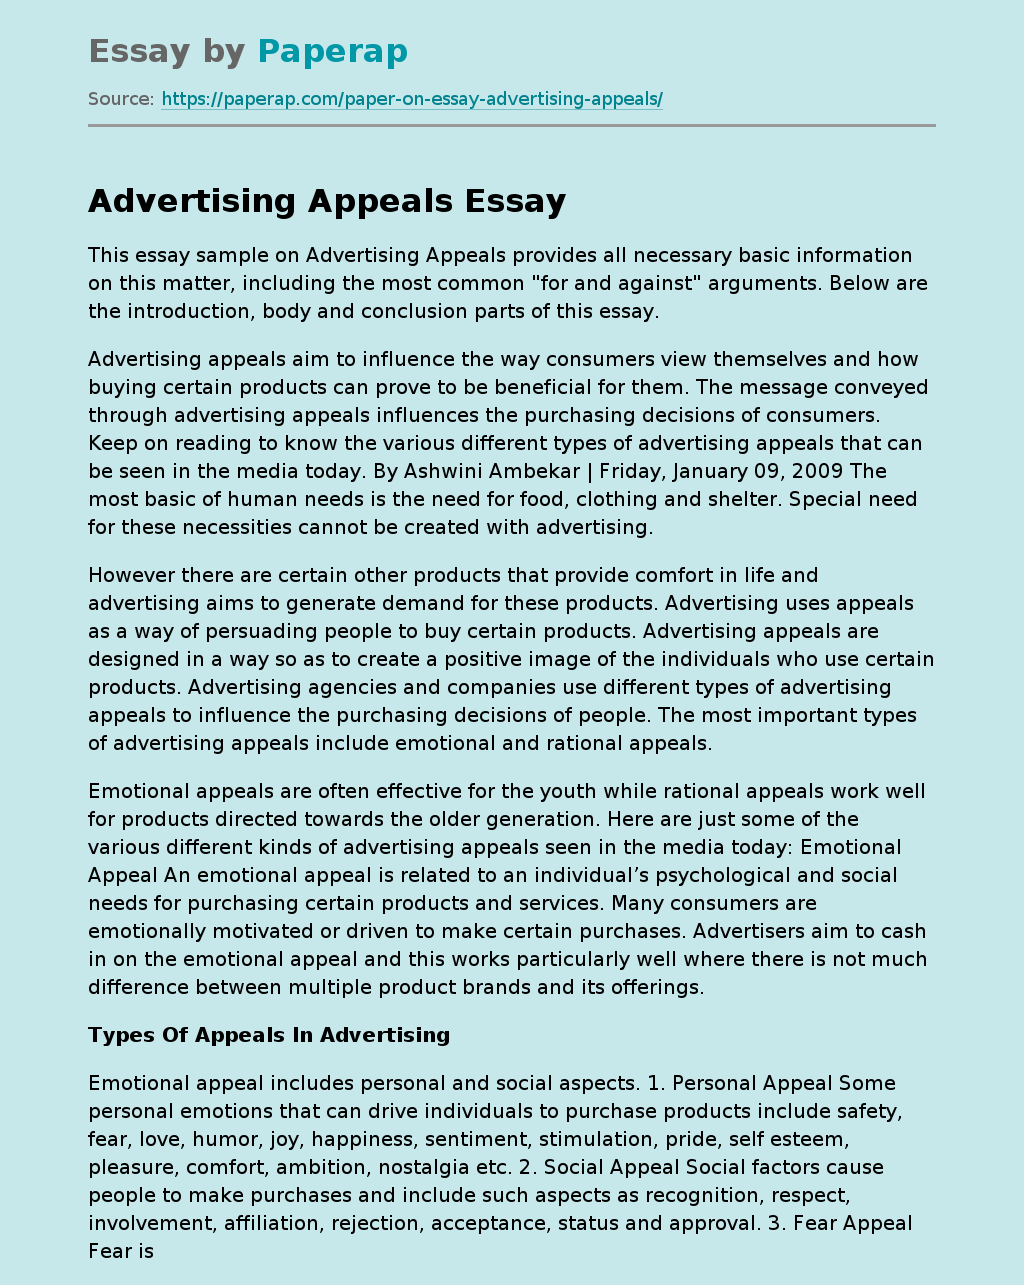 advertising a product essay